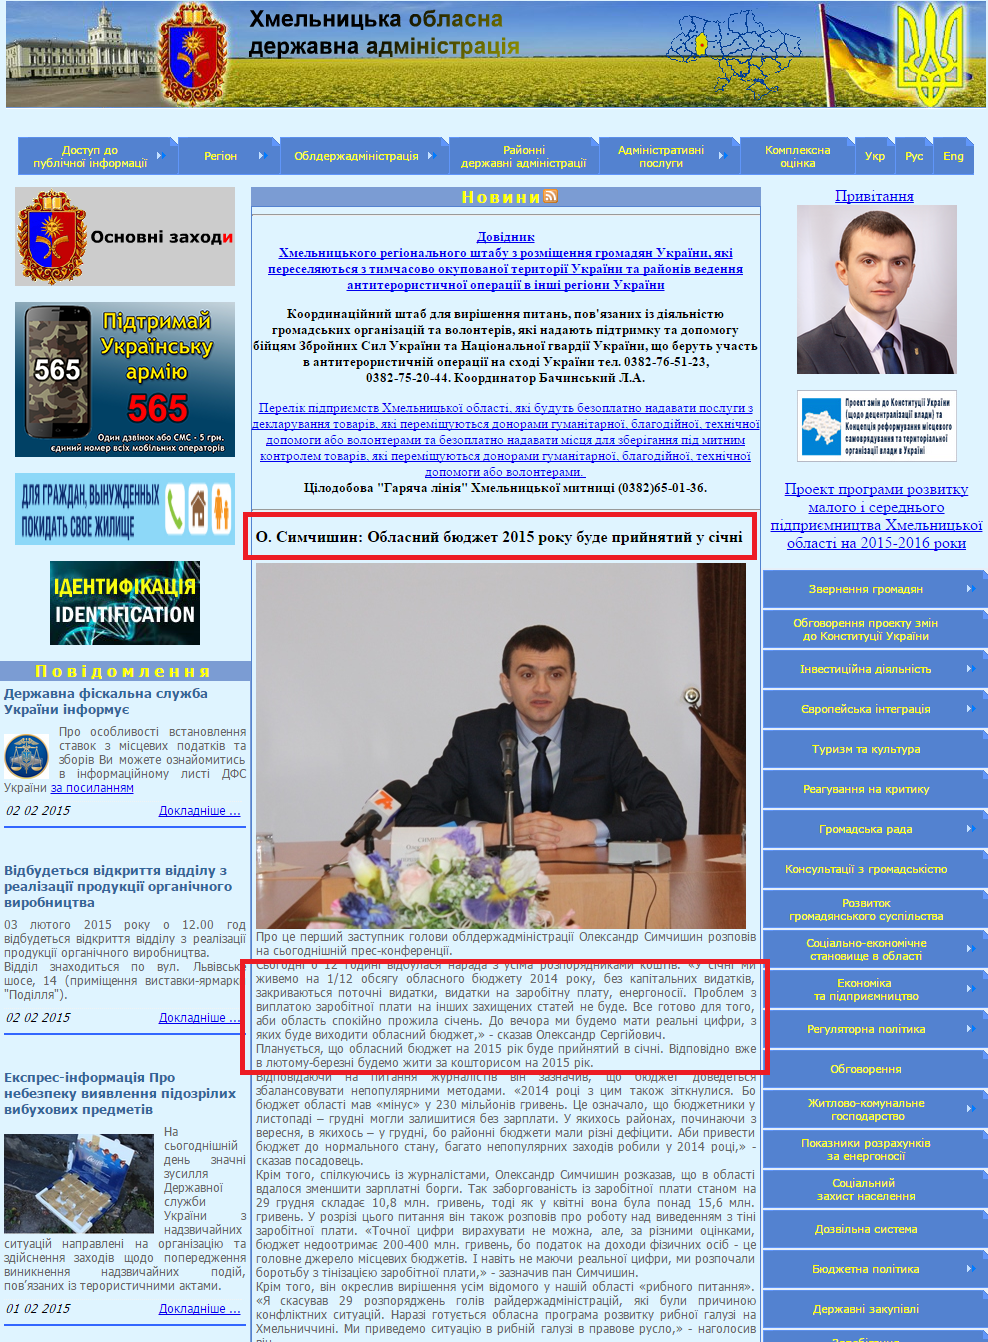 http://www.adm-km.gov.ua/index.php?subaction=showfull&id=1419872256&archive=&start_from=&ucat=5&